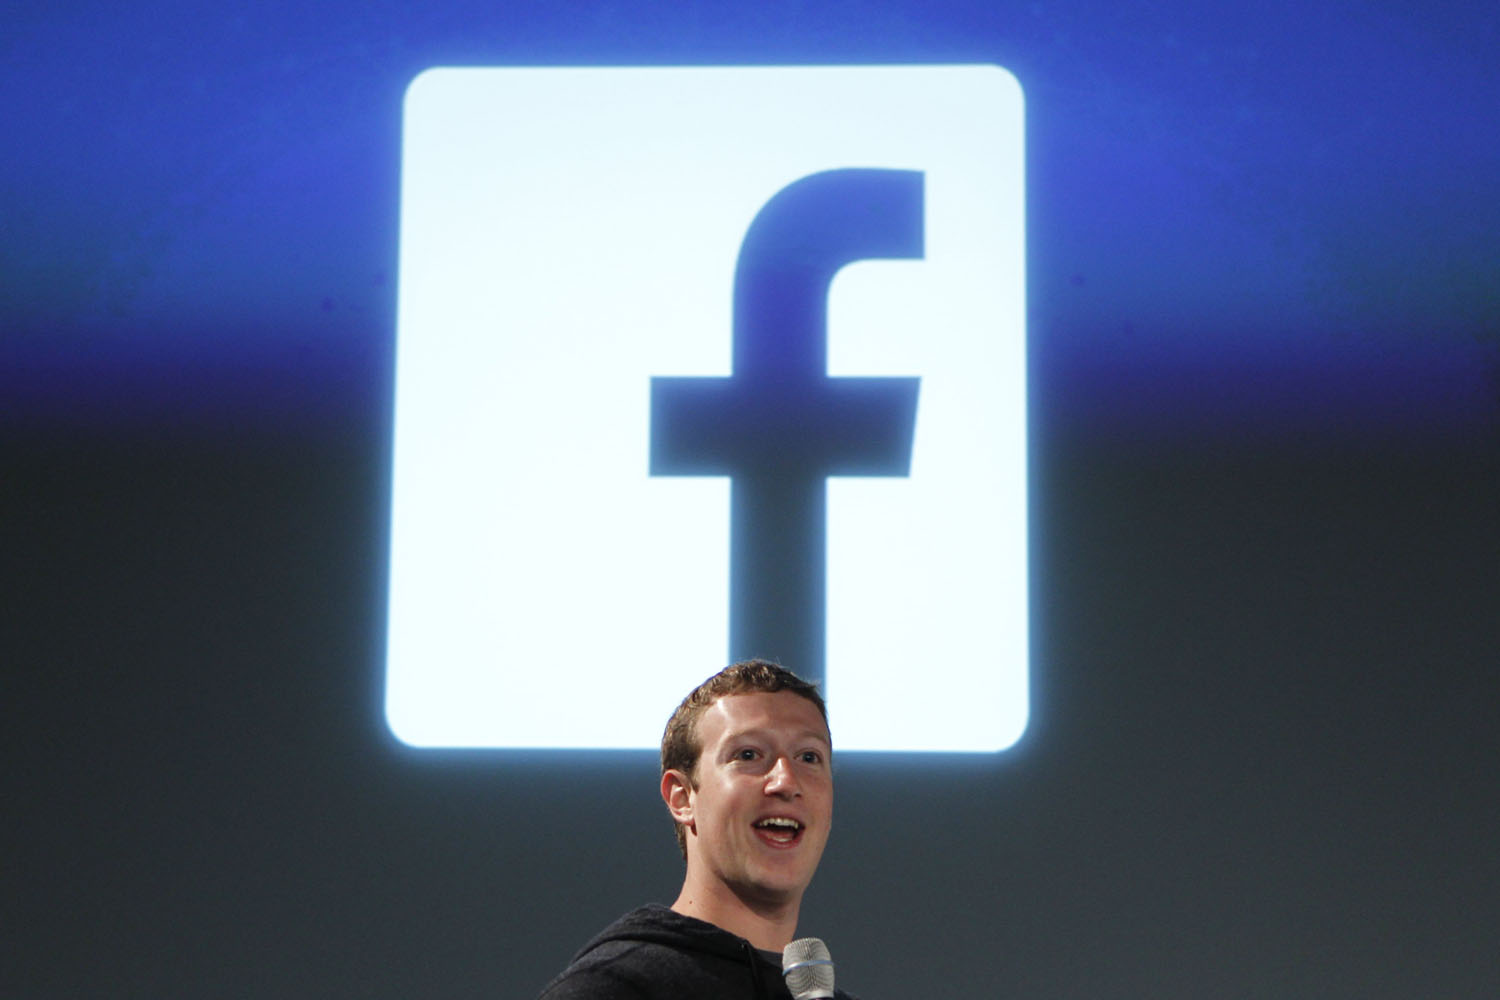 Facebook CEO Zuckerberg addresses the audience during a media event at Facebook headquarters in Menlo Park